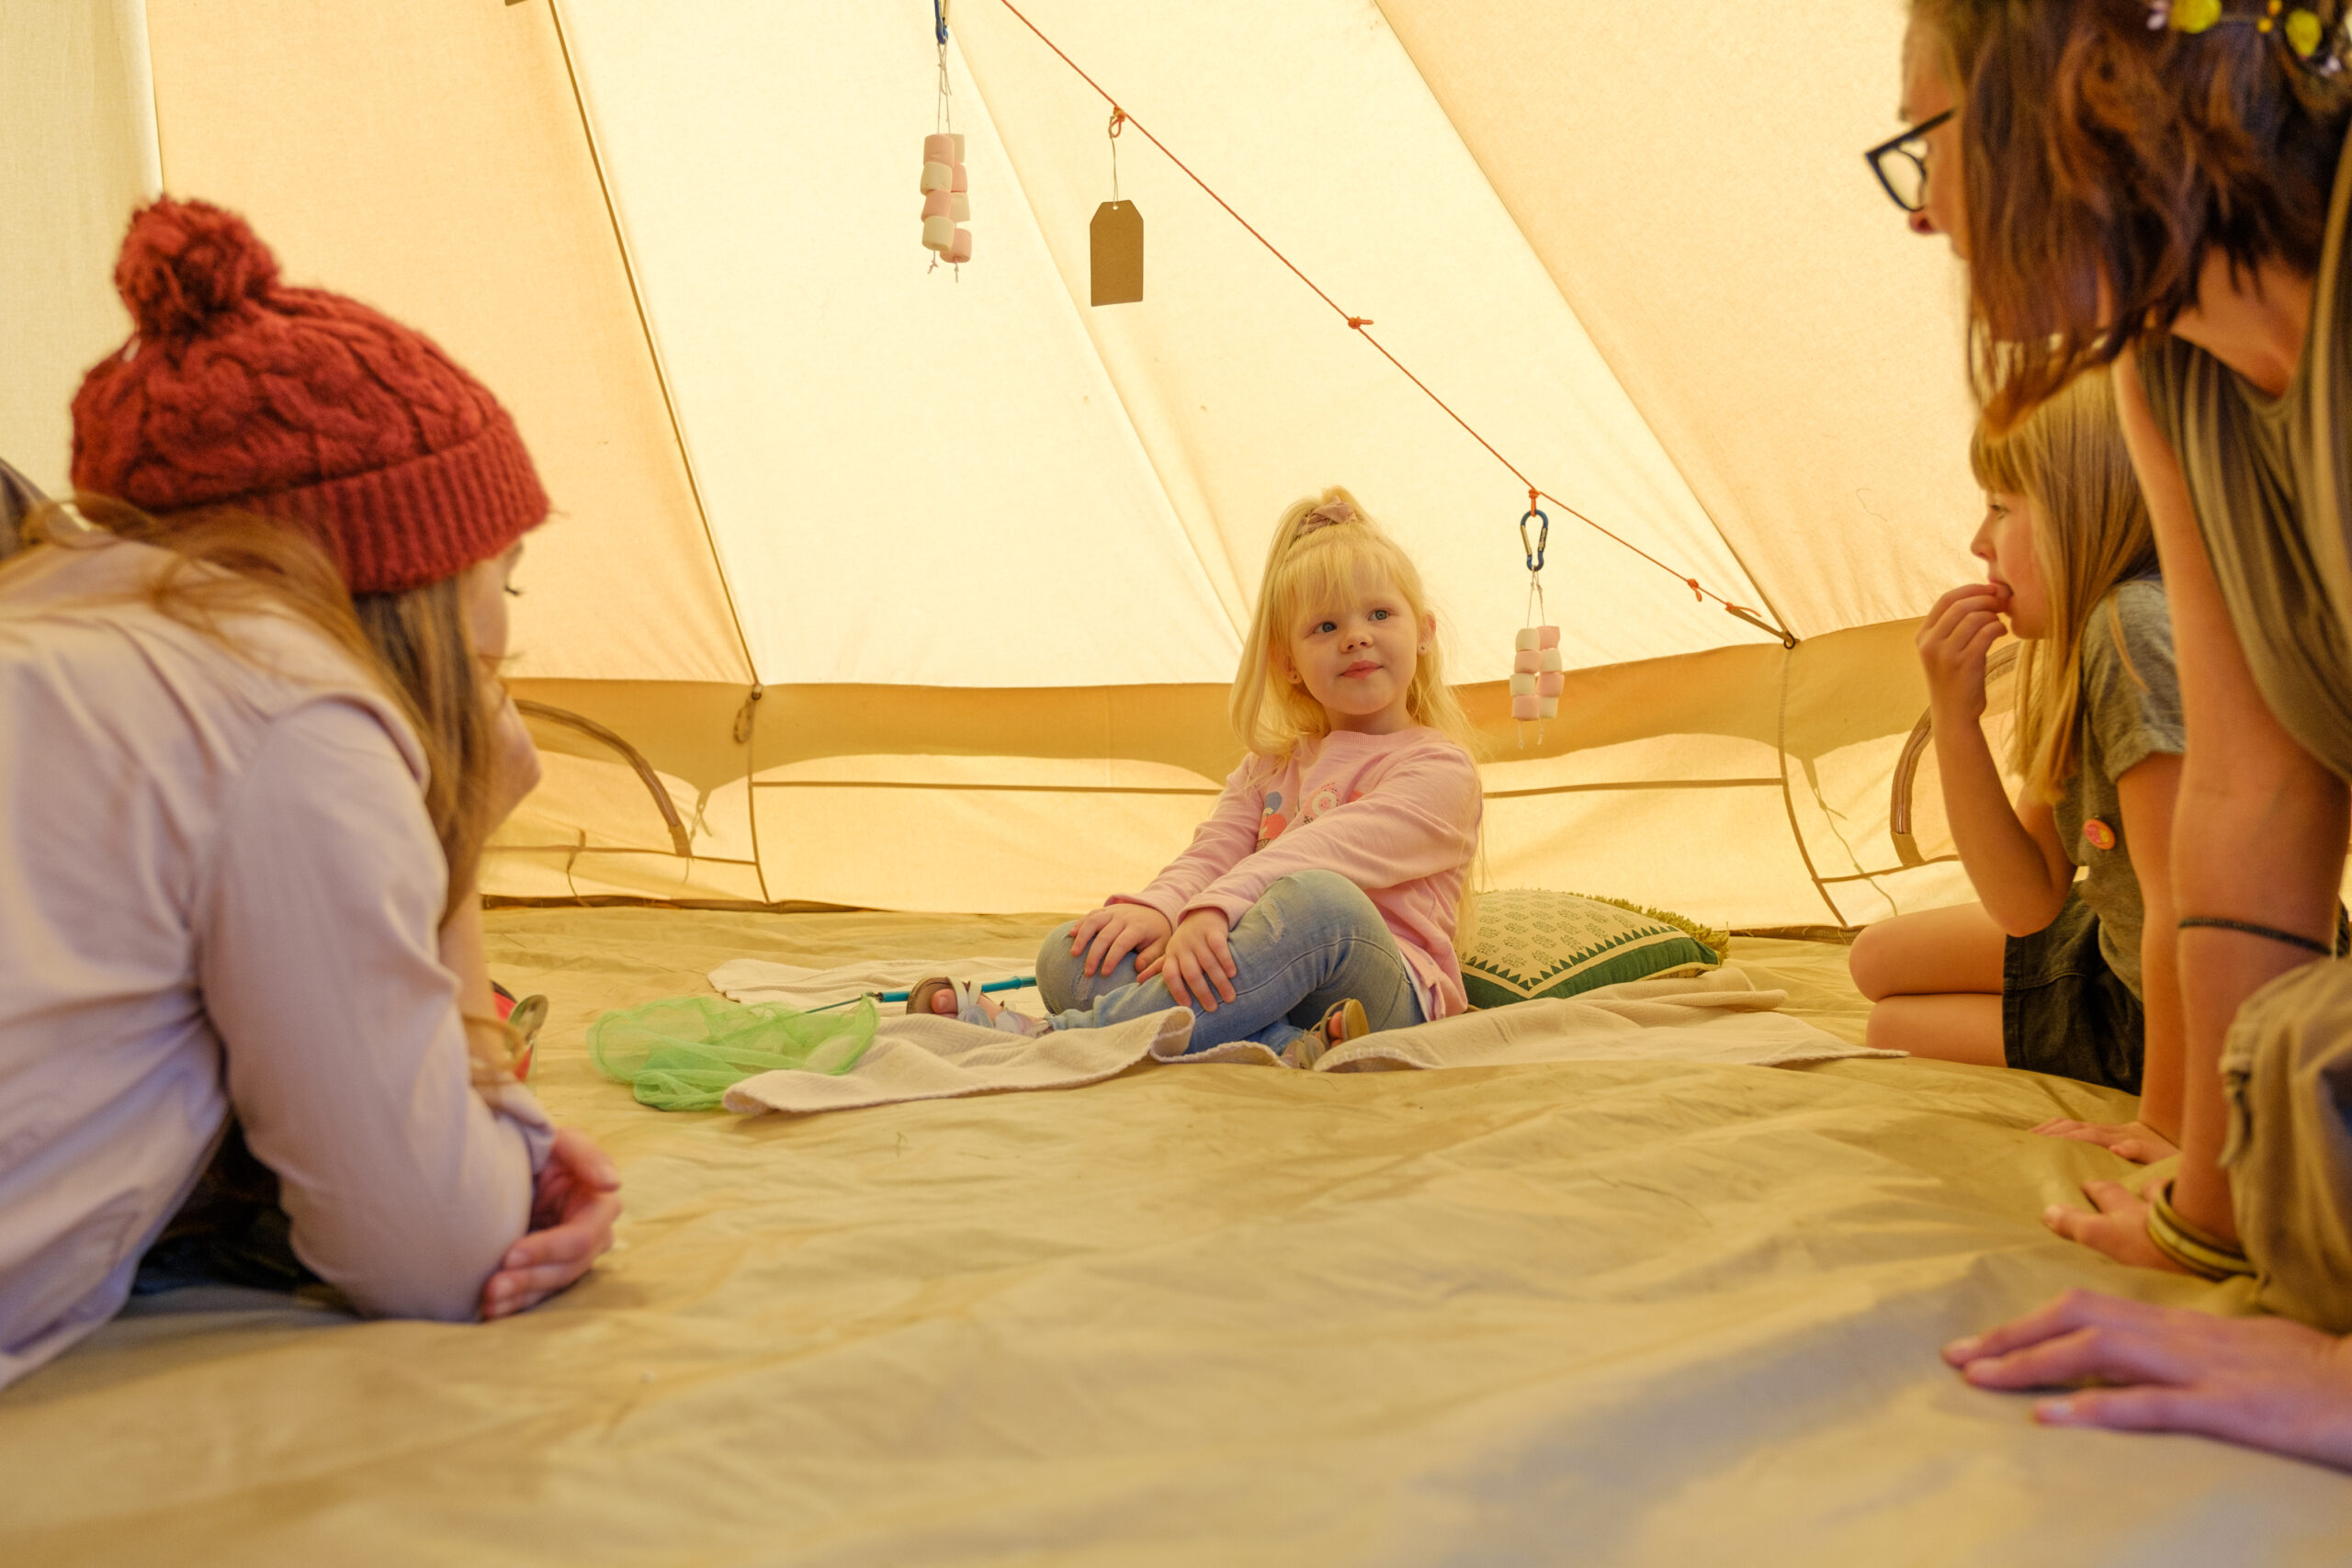 A small group of children and adults sit inside a tent